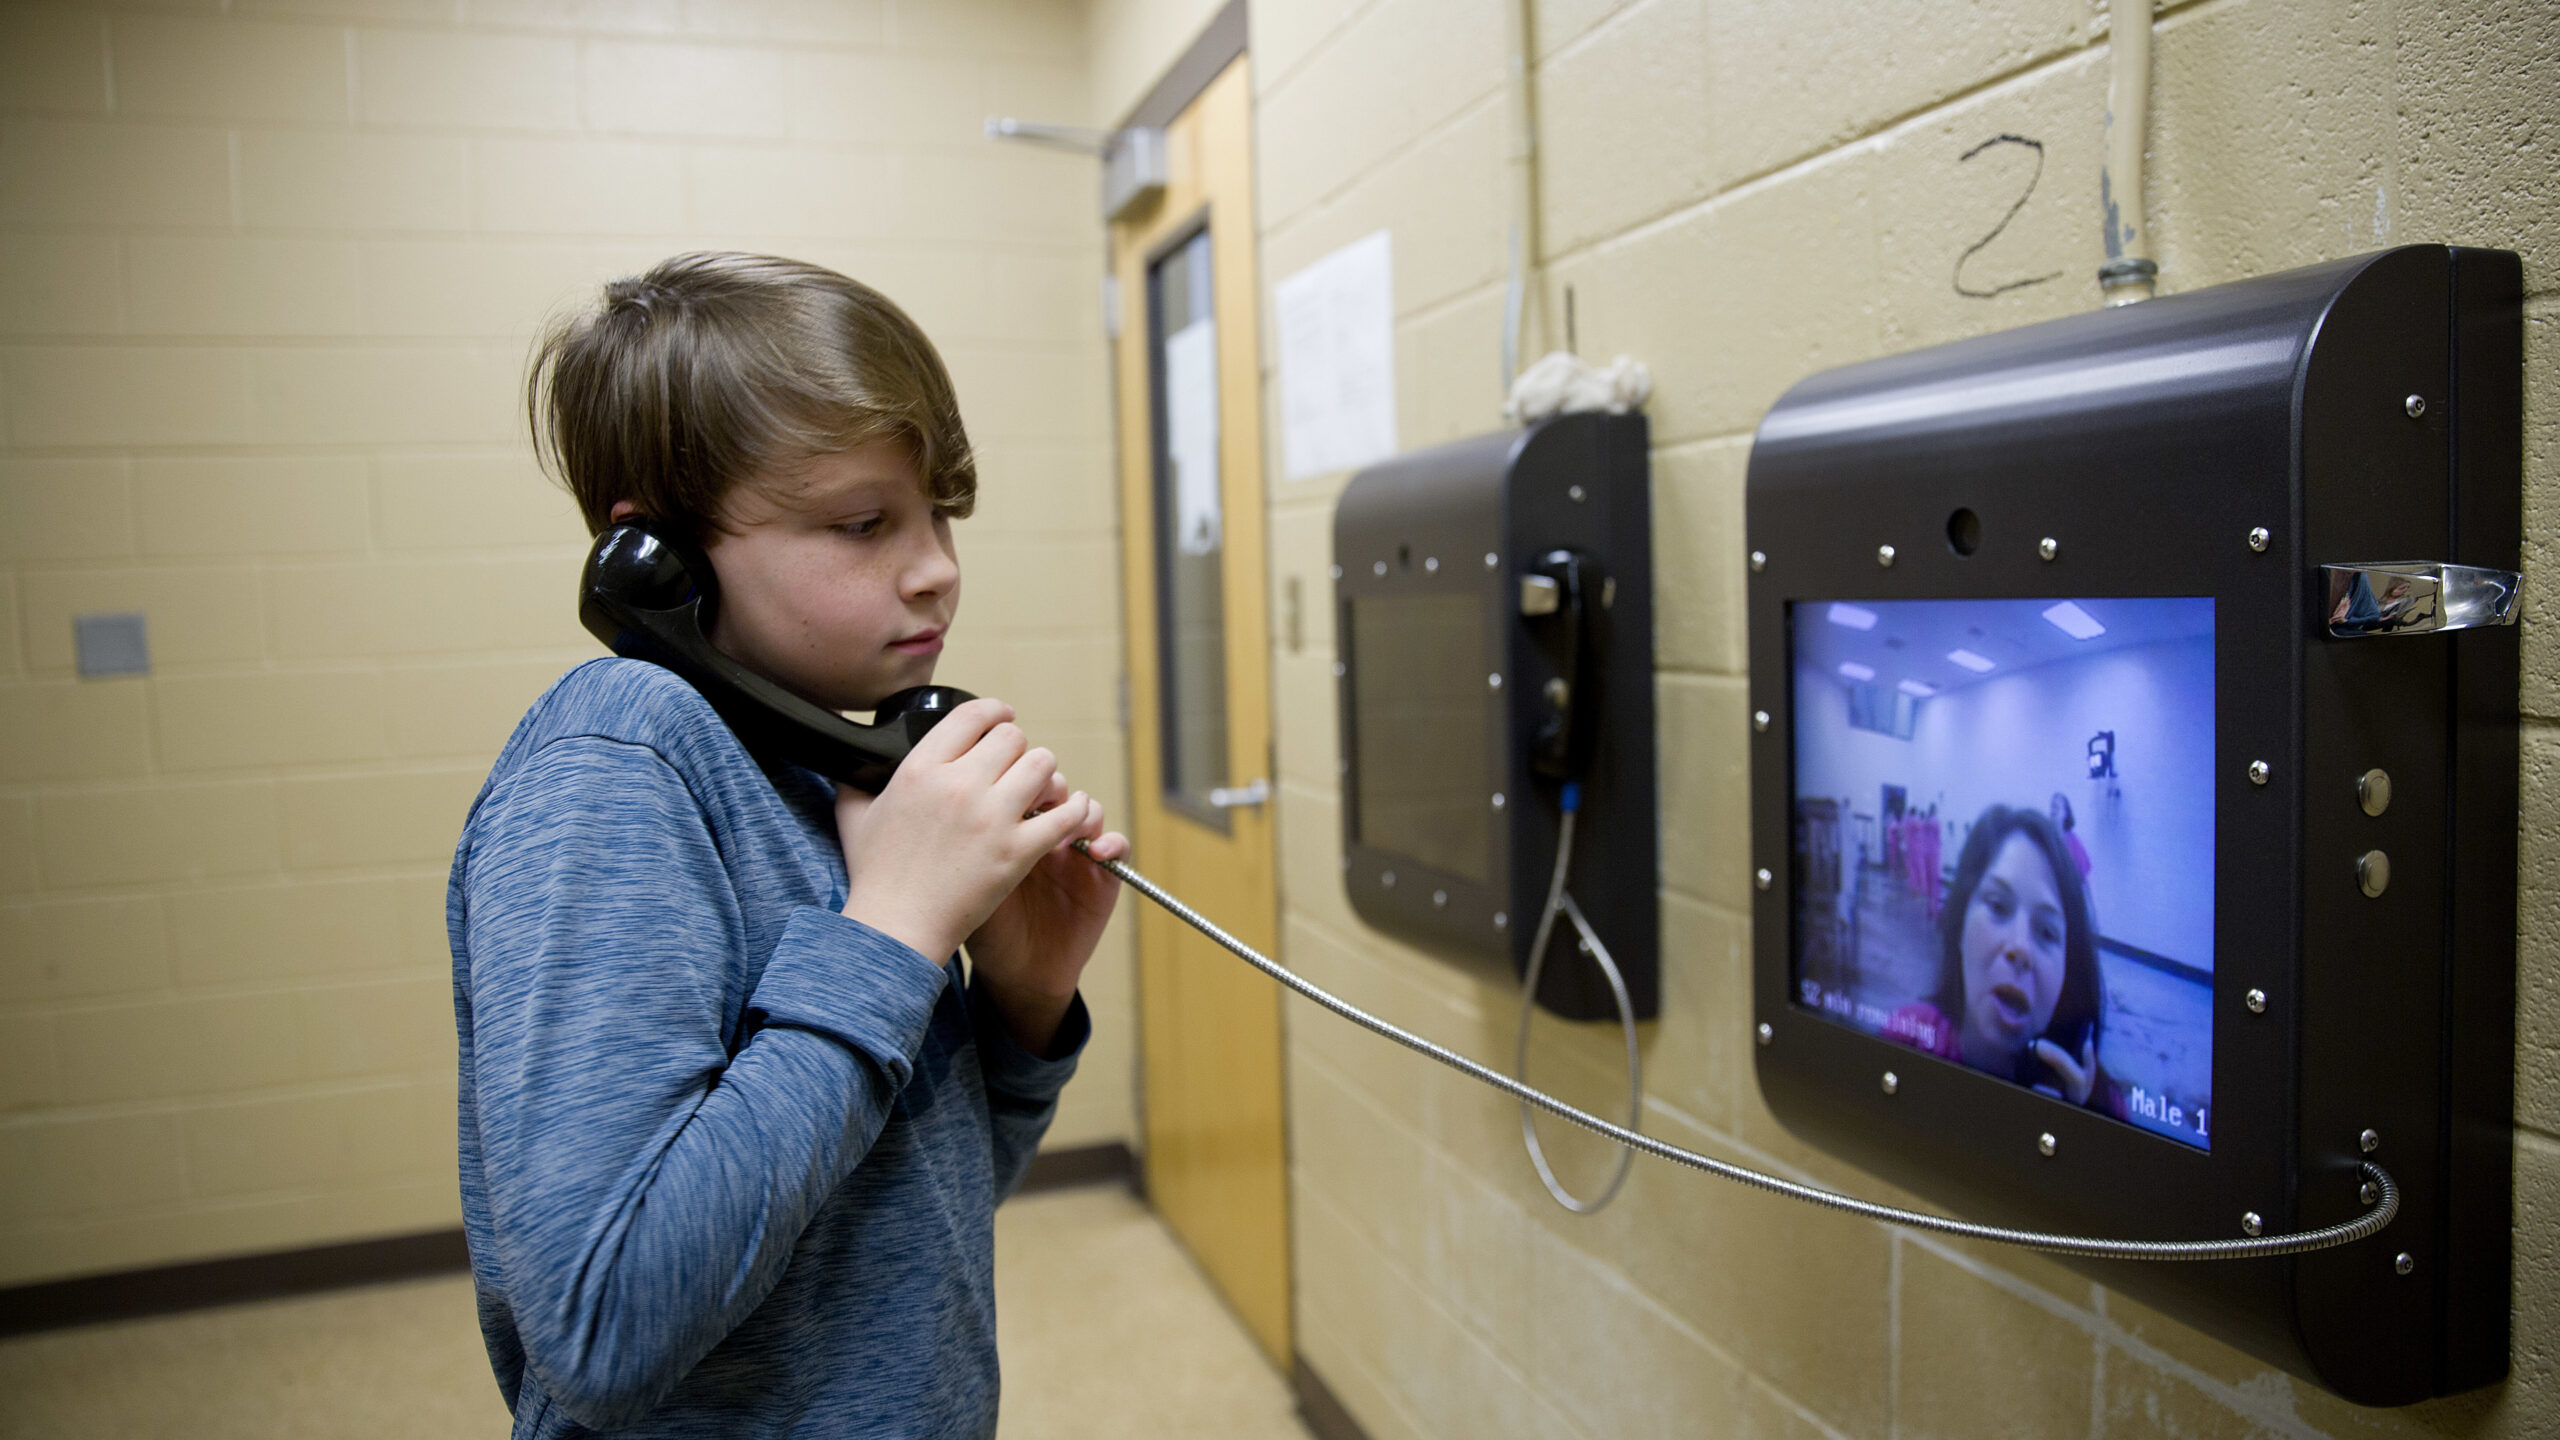 Jails are embracing video-only visits, but some experts say screens aren’t enough